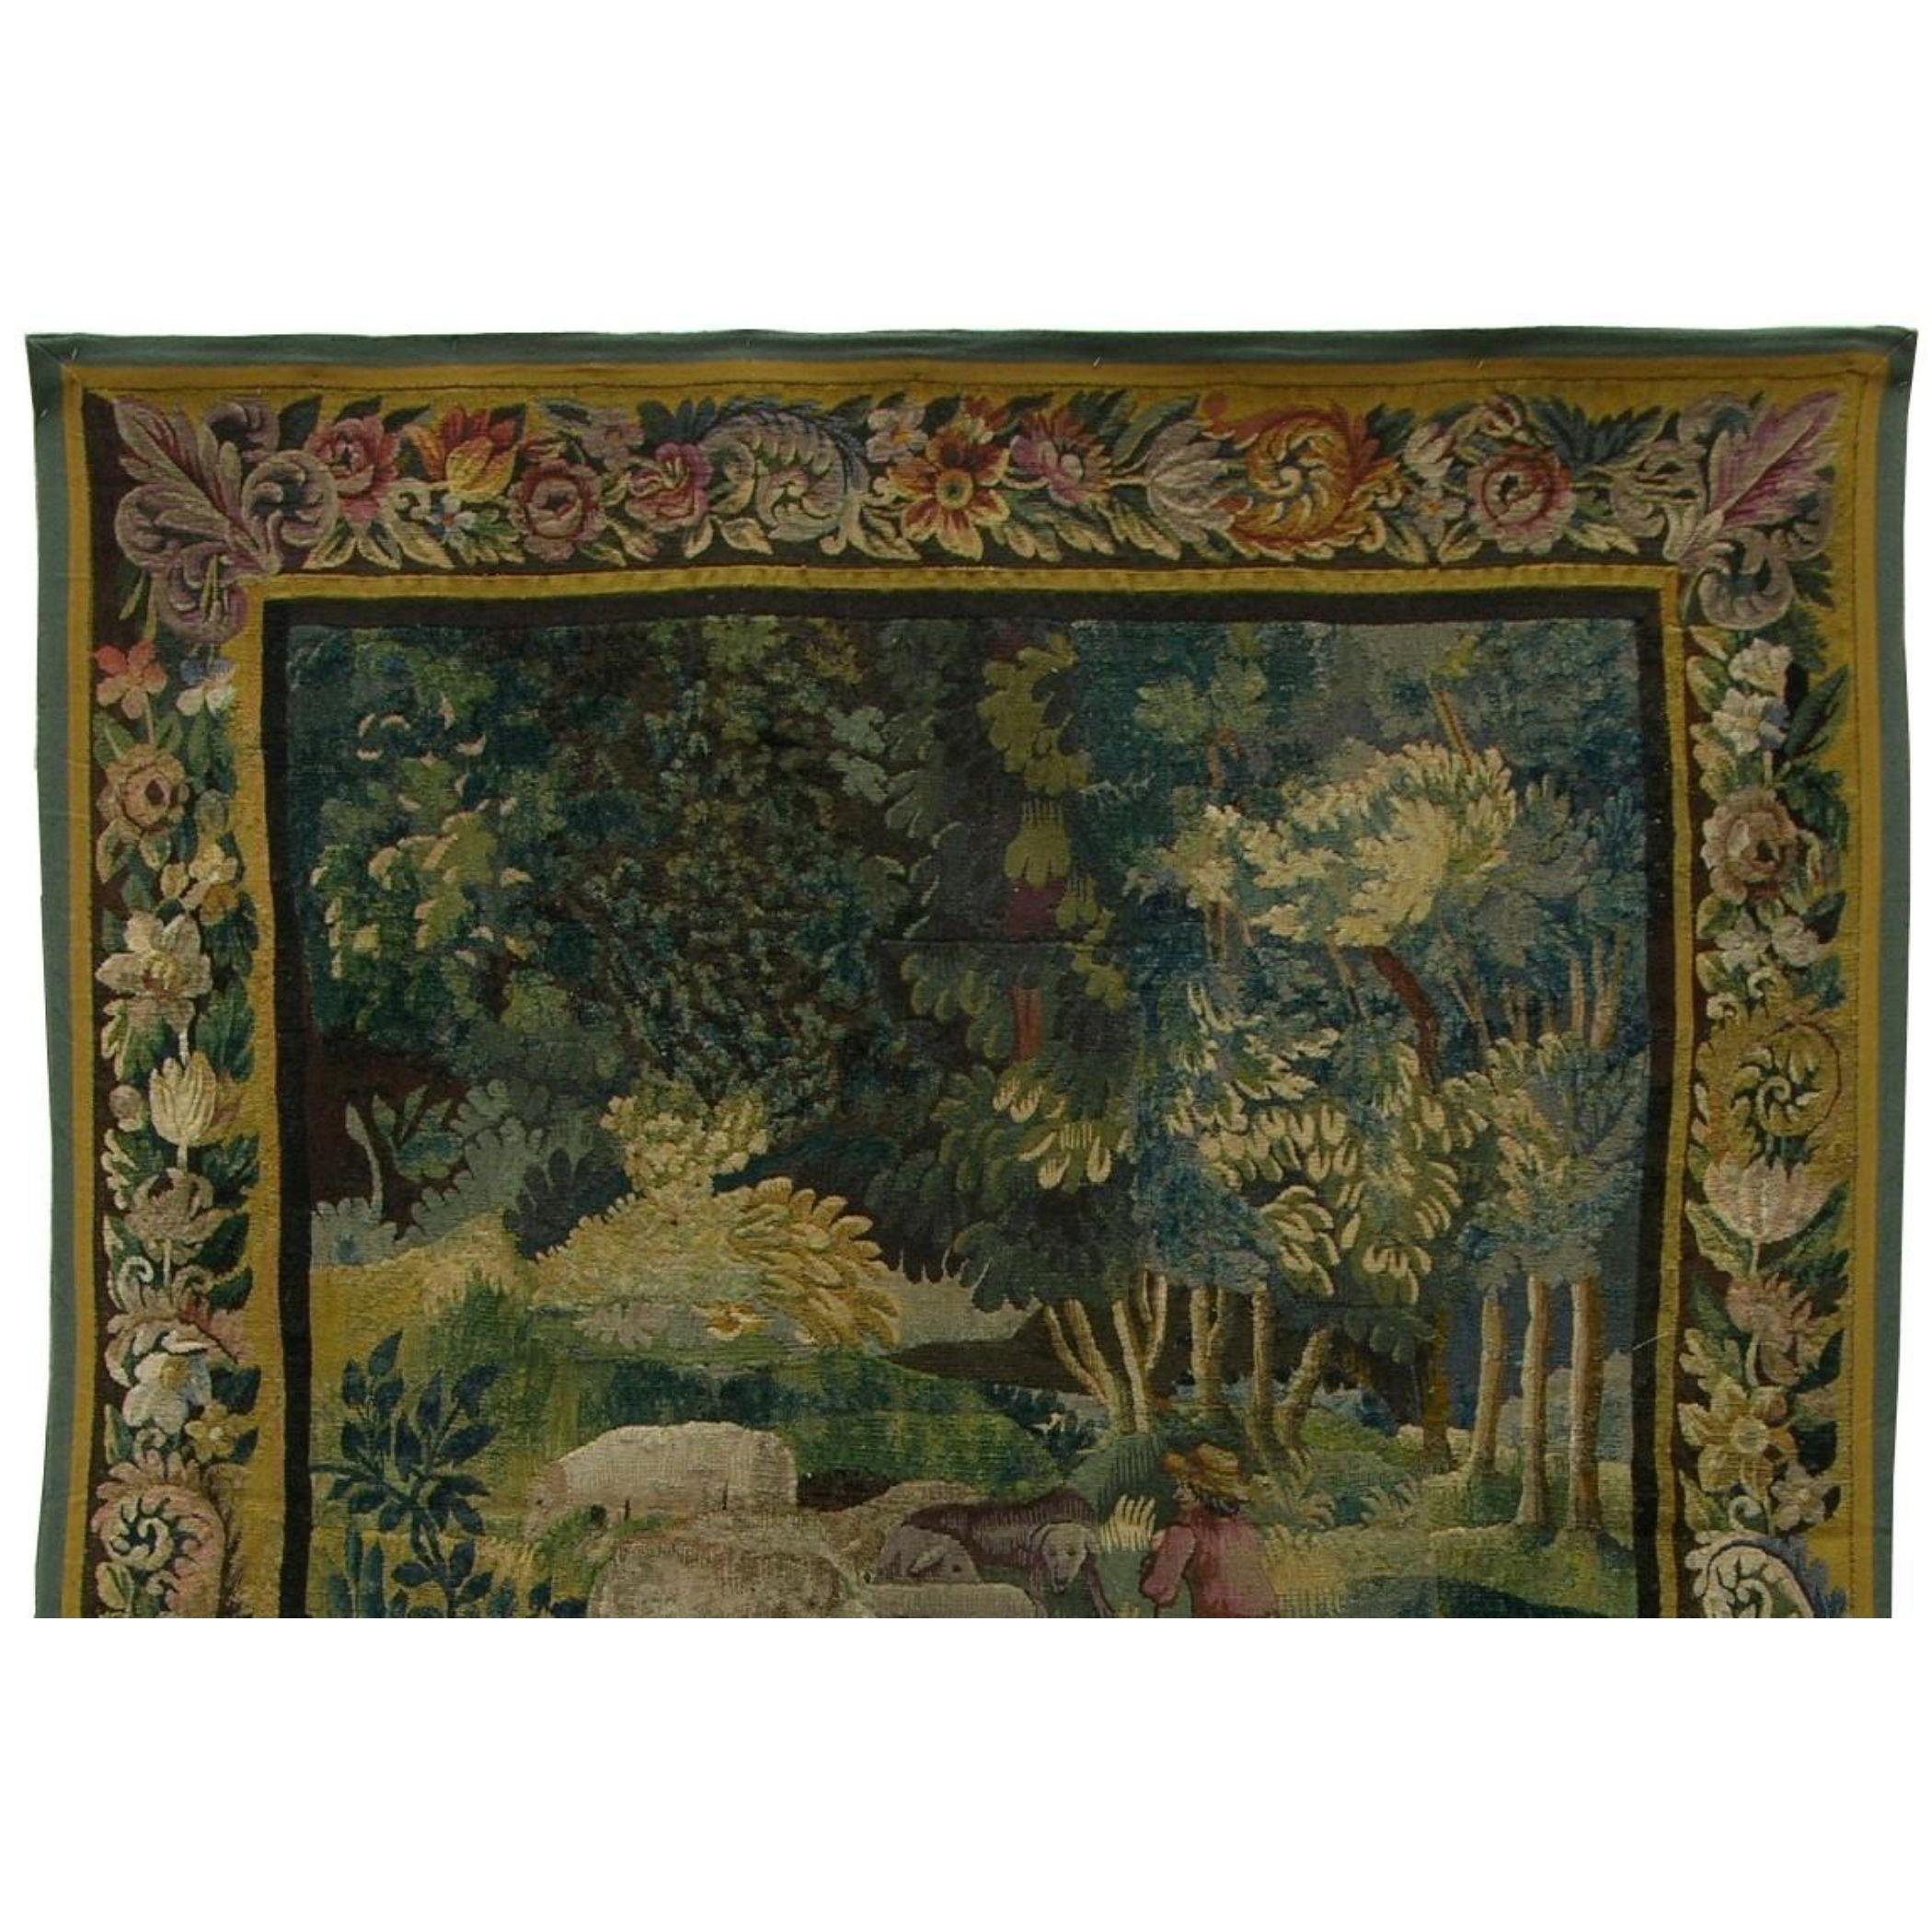 Unknown 17th Century Antique Flemish Tapestry 7'4